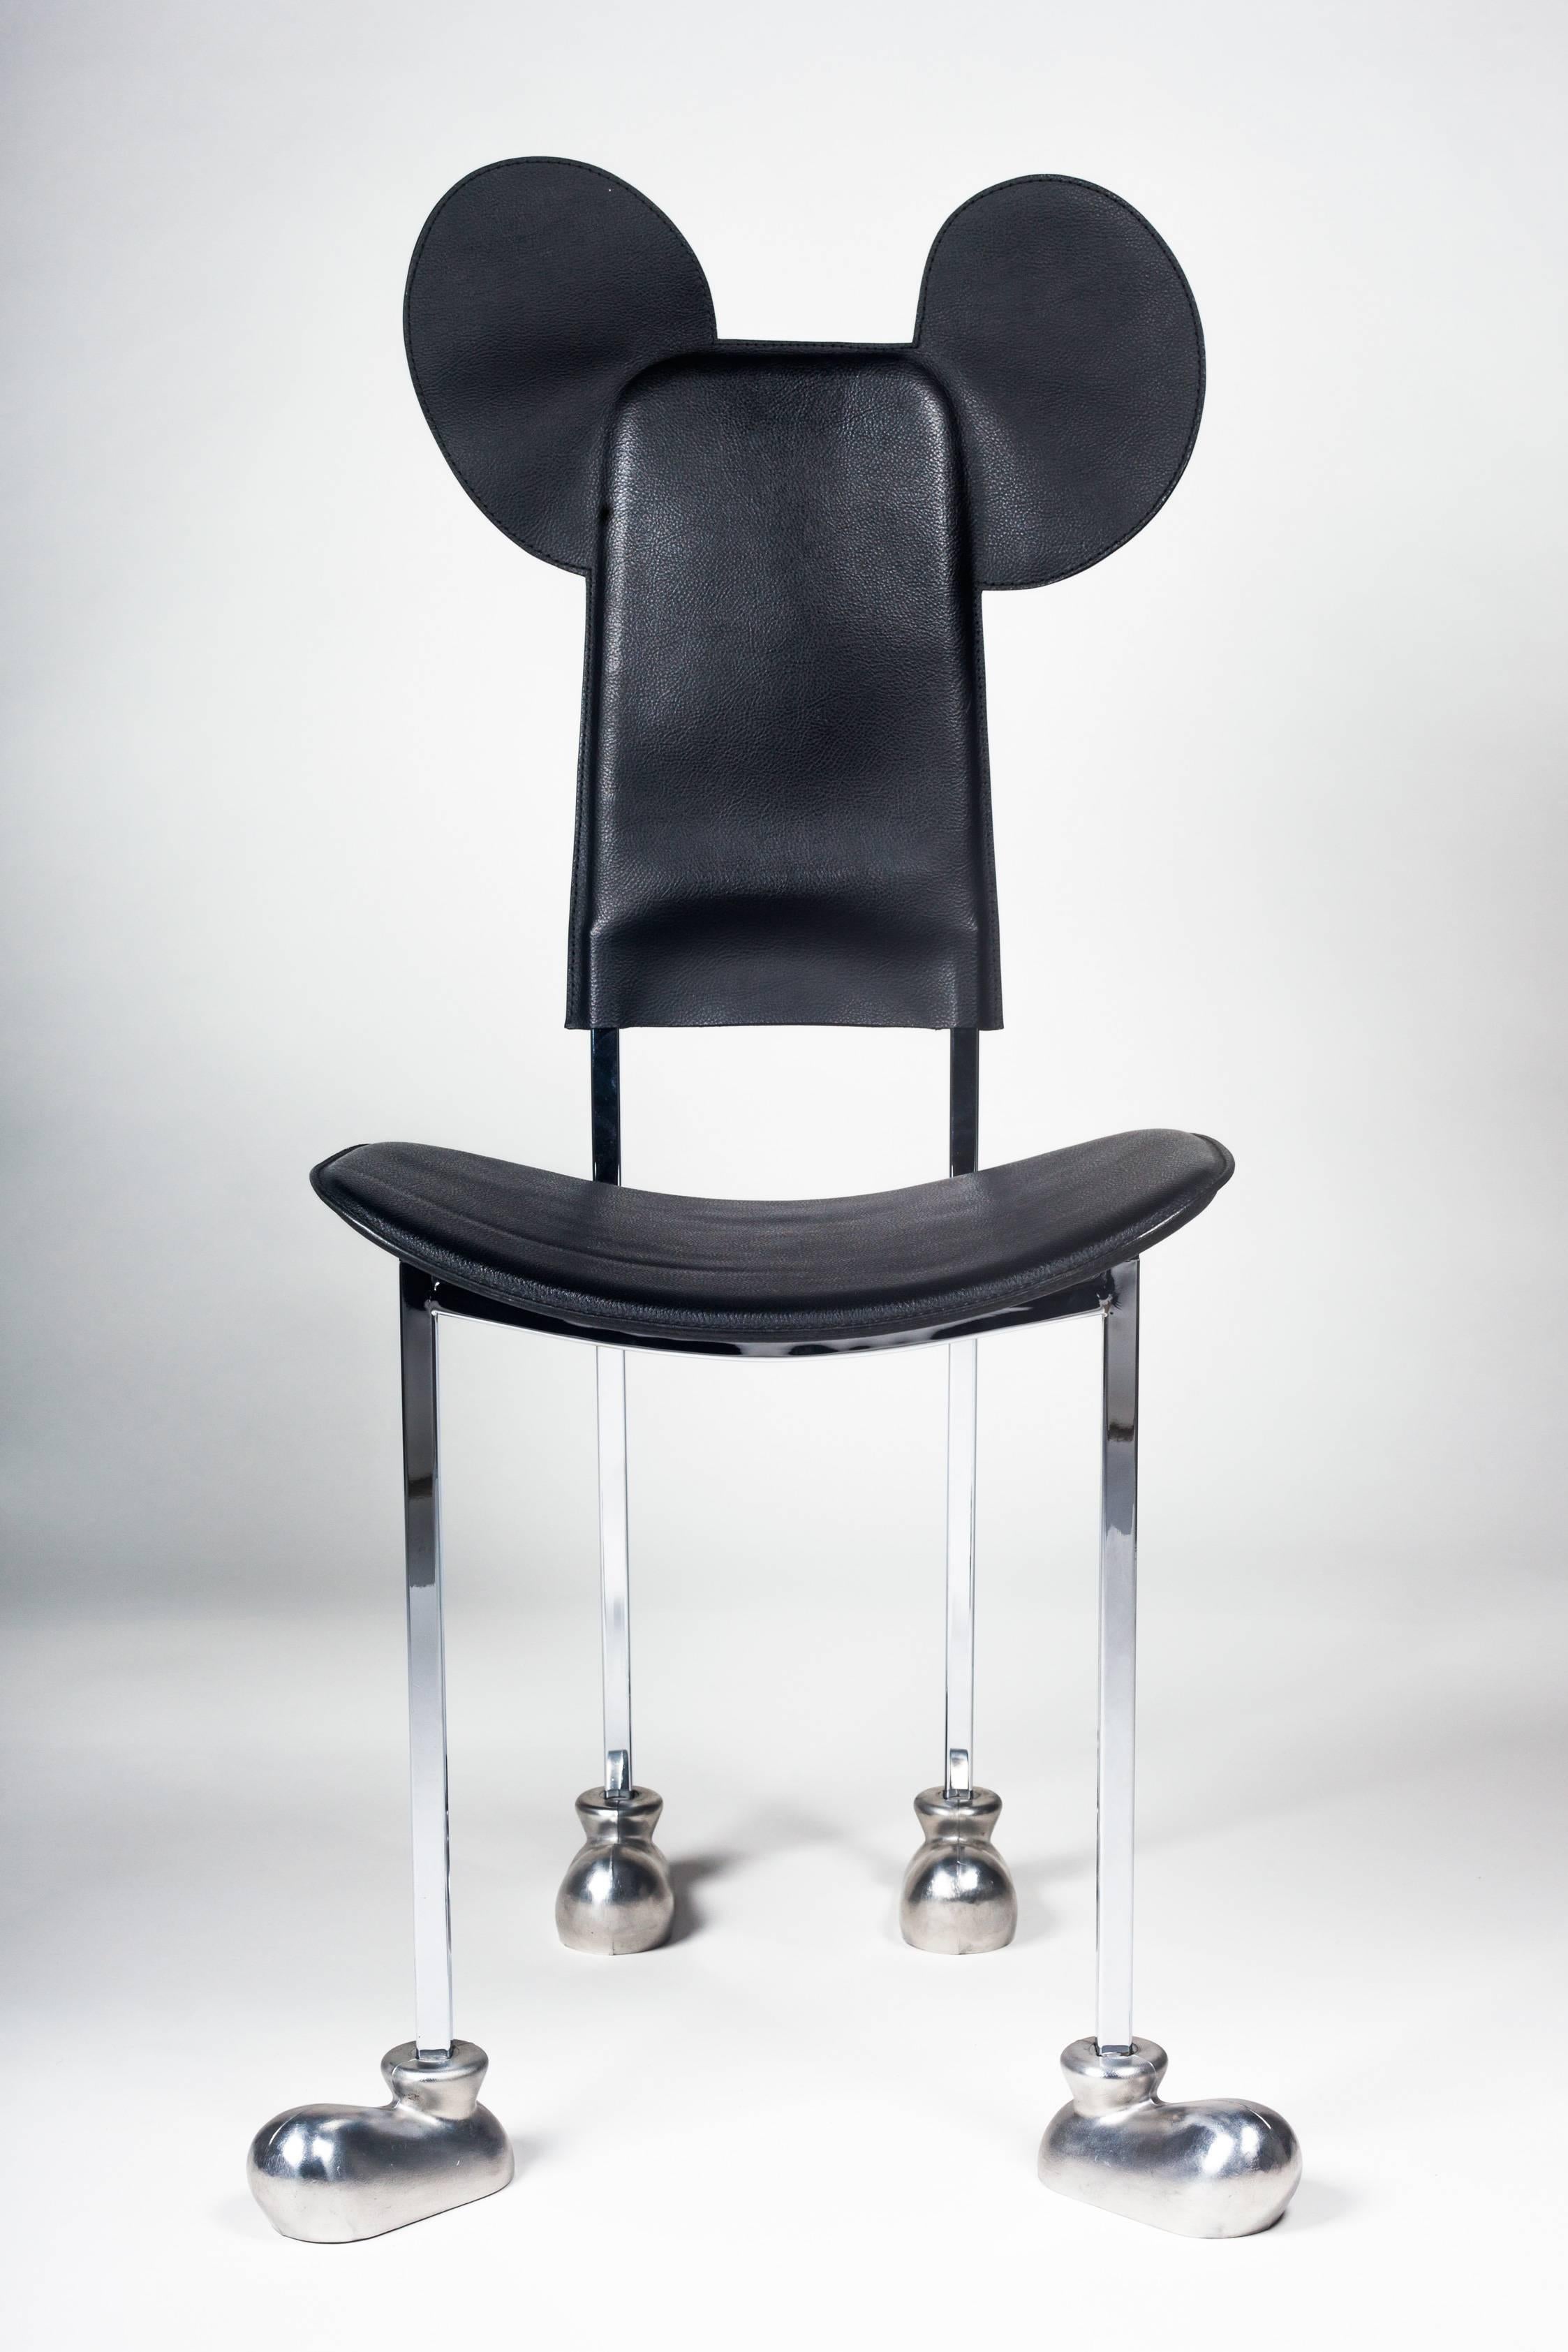 The Garriris chair, commonly called the Mickey chair, is an iconic postmodern design that Javier Mariscal made for his own brand, Akaba, in 1987. This year, 2018, celebrates the 90th anniversary of the Mickey Mouse character. 

In the 1970s, before